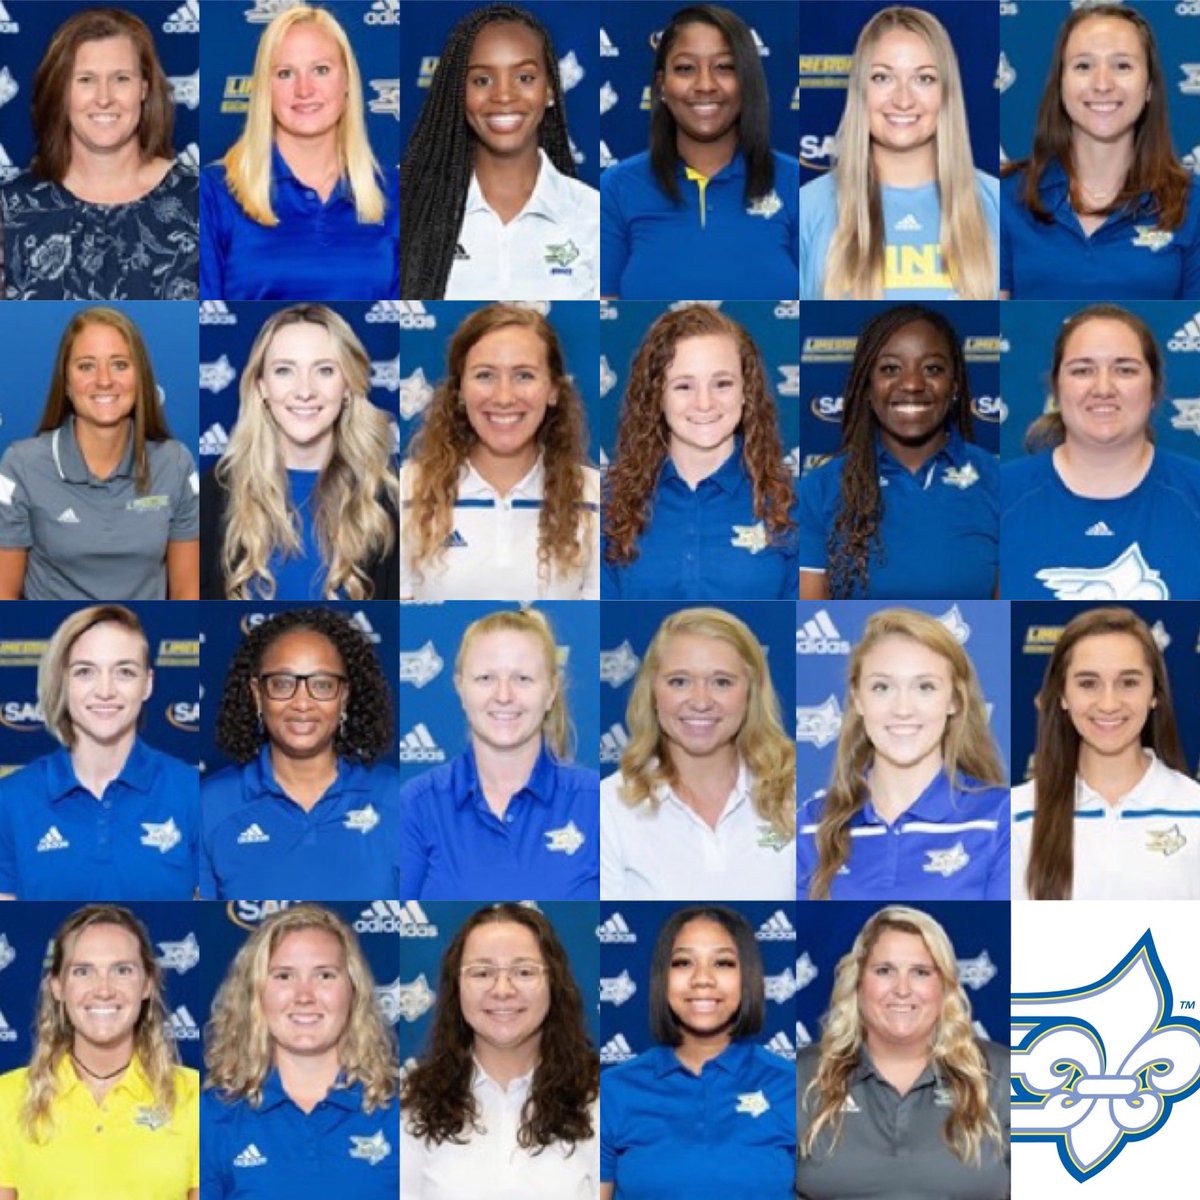 Happy International Women’s Day to the ladies of Limestone Athletics who serve our student-athletes and cultivate future leaders by being  examples of how to break barriers through hard work and diligence. I’m grateful to serve with you. #internationalwomensday #womeninathletics